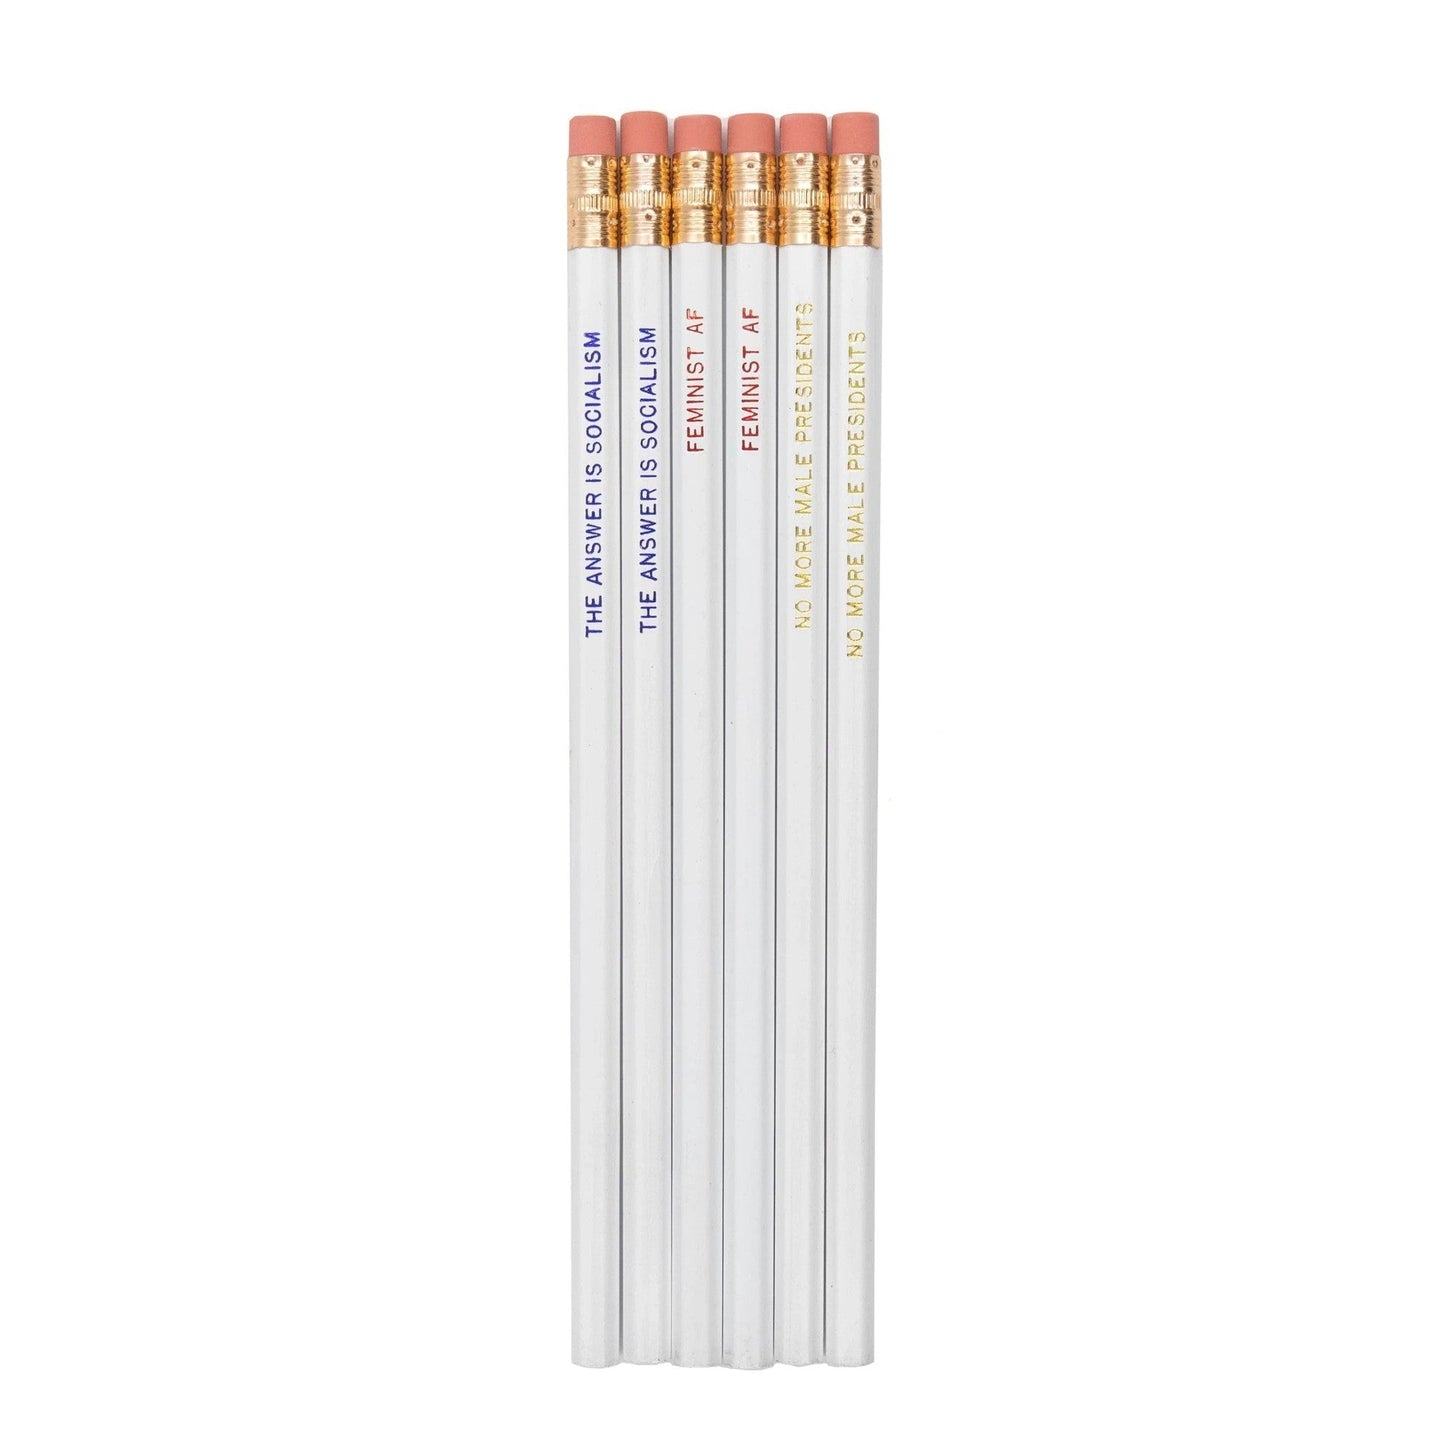 Feminist + Socialist Red, White, and Blue Political Pencil Set of 3